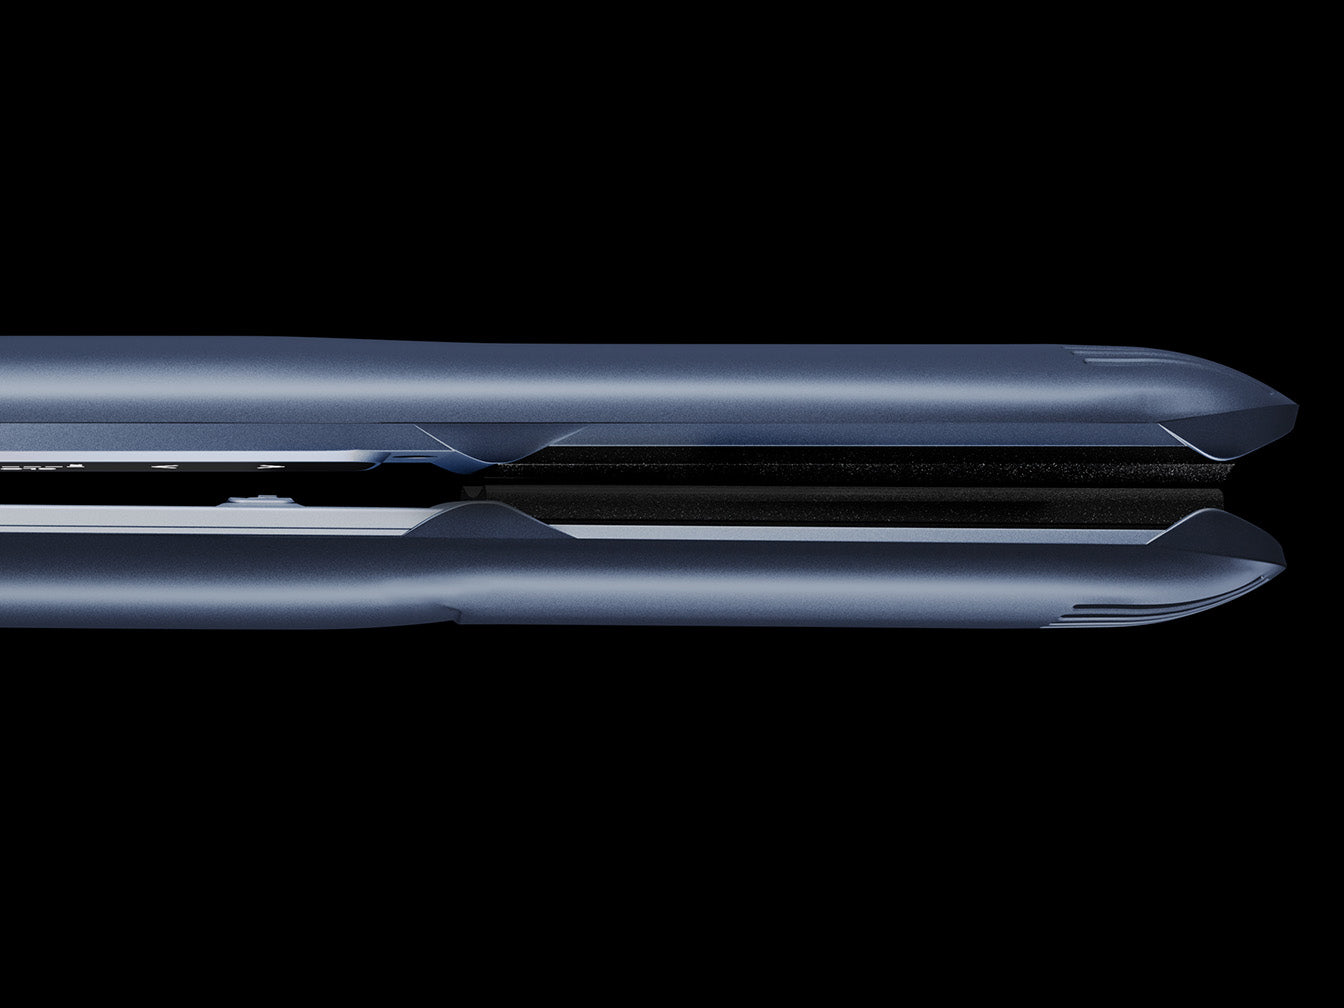 Side view of a blue 2-in-1 Contouring Iron Pro against a black background.